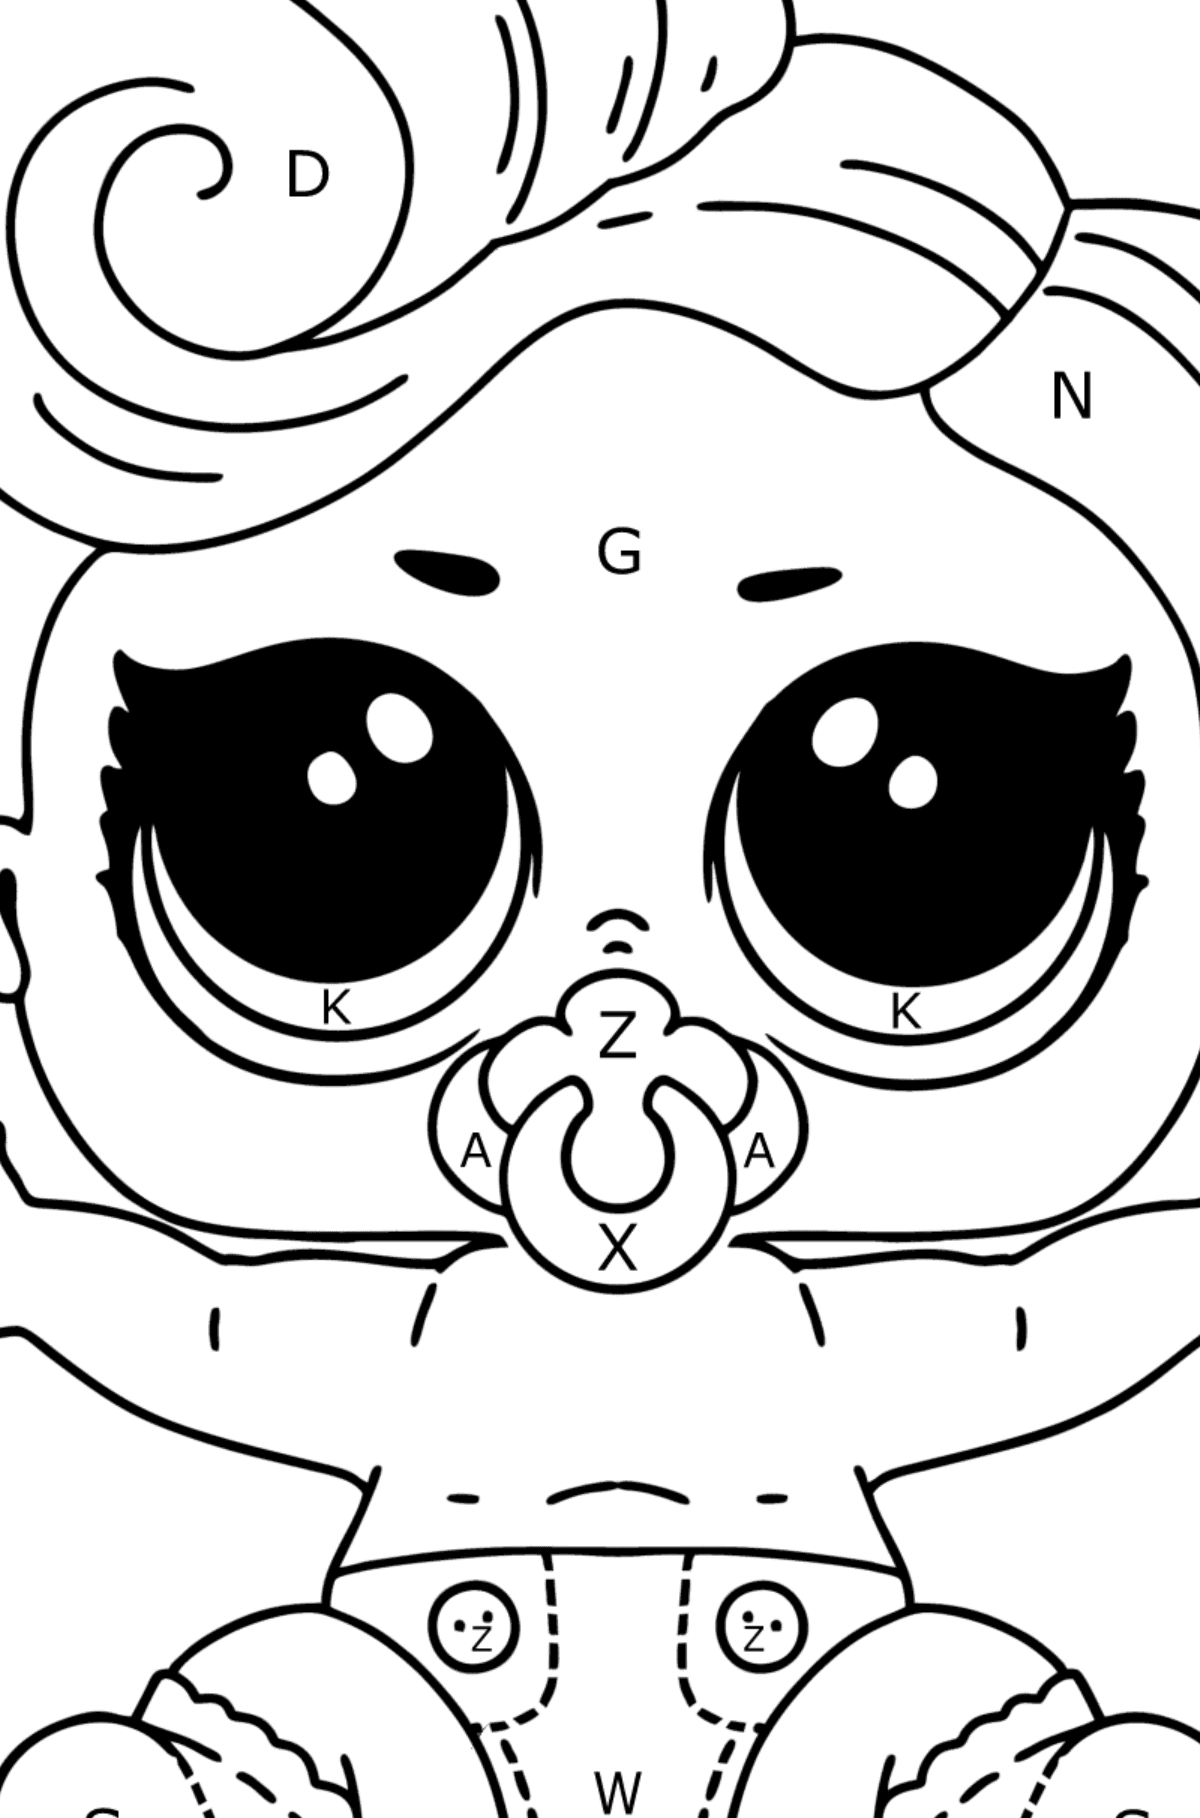 Coloring page LOL LIL Lux - Coloring by Letters for Kids